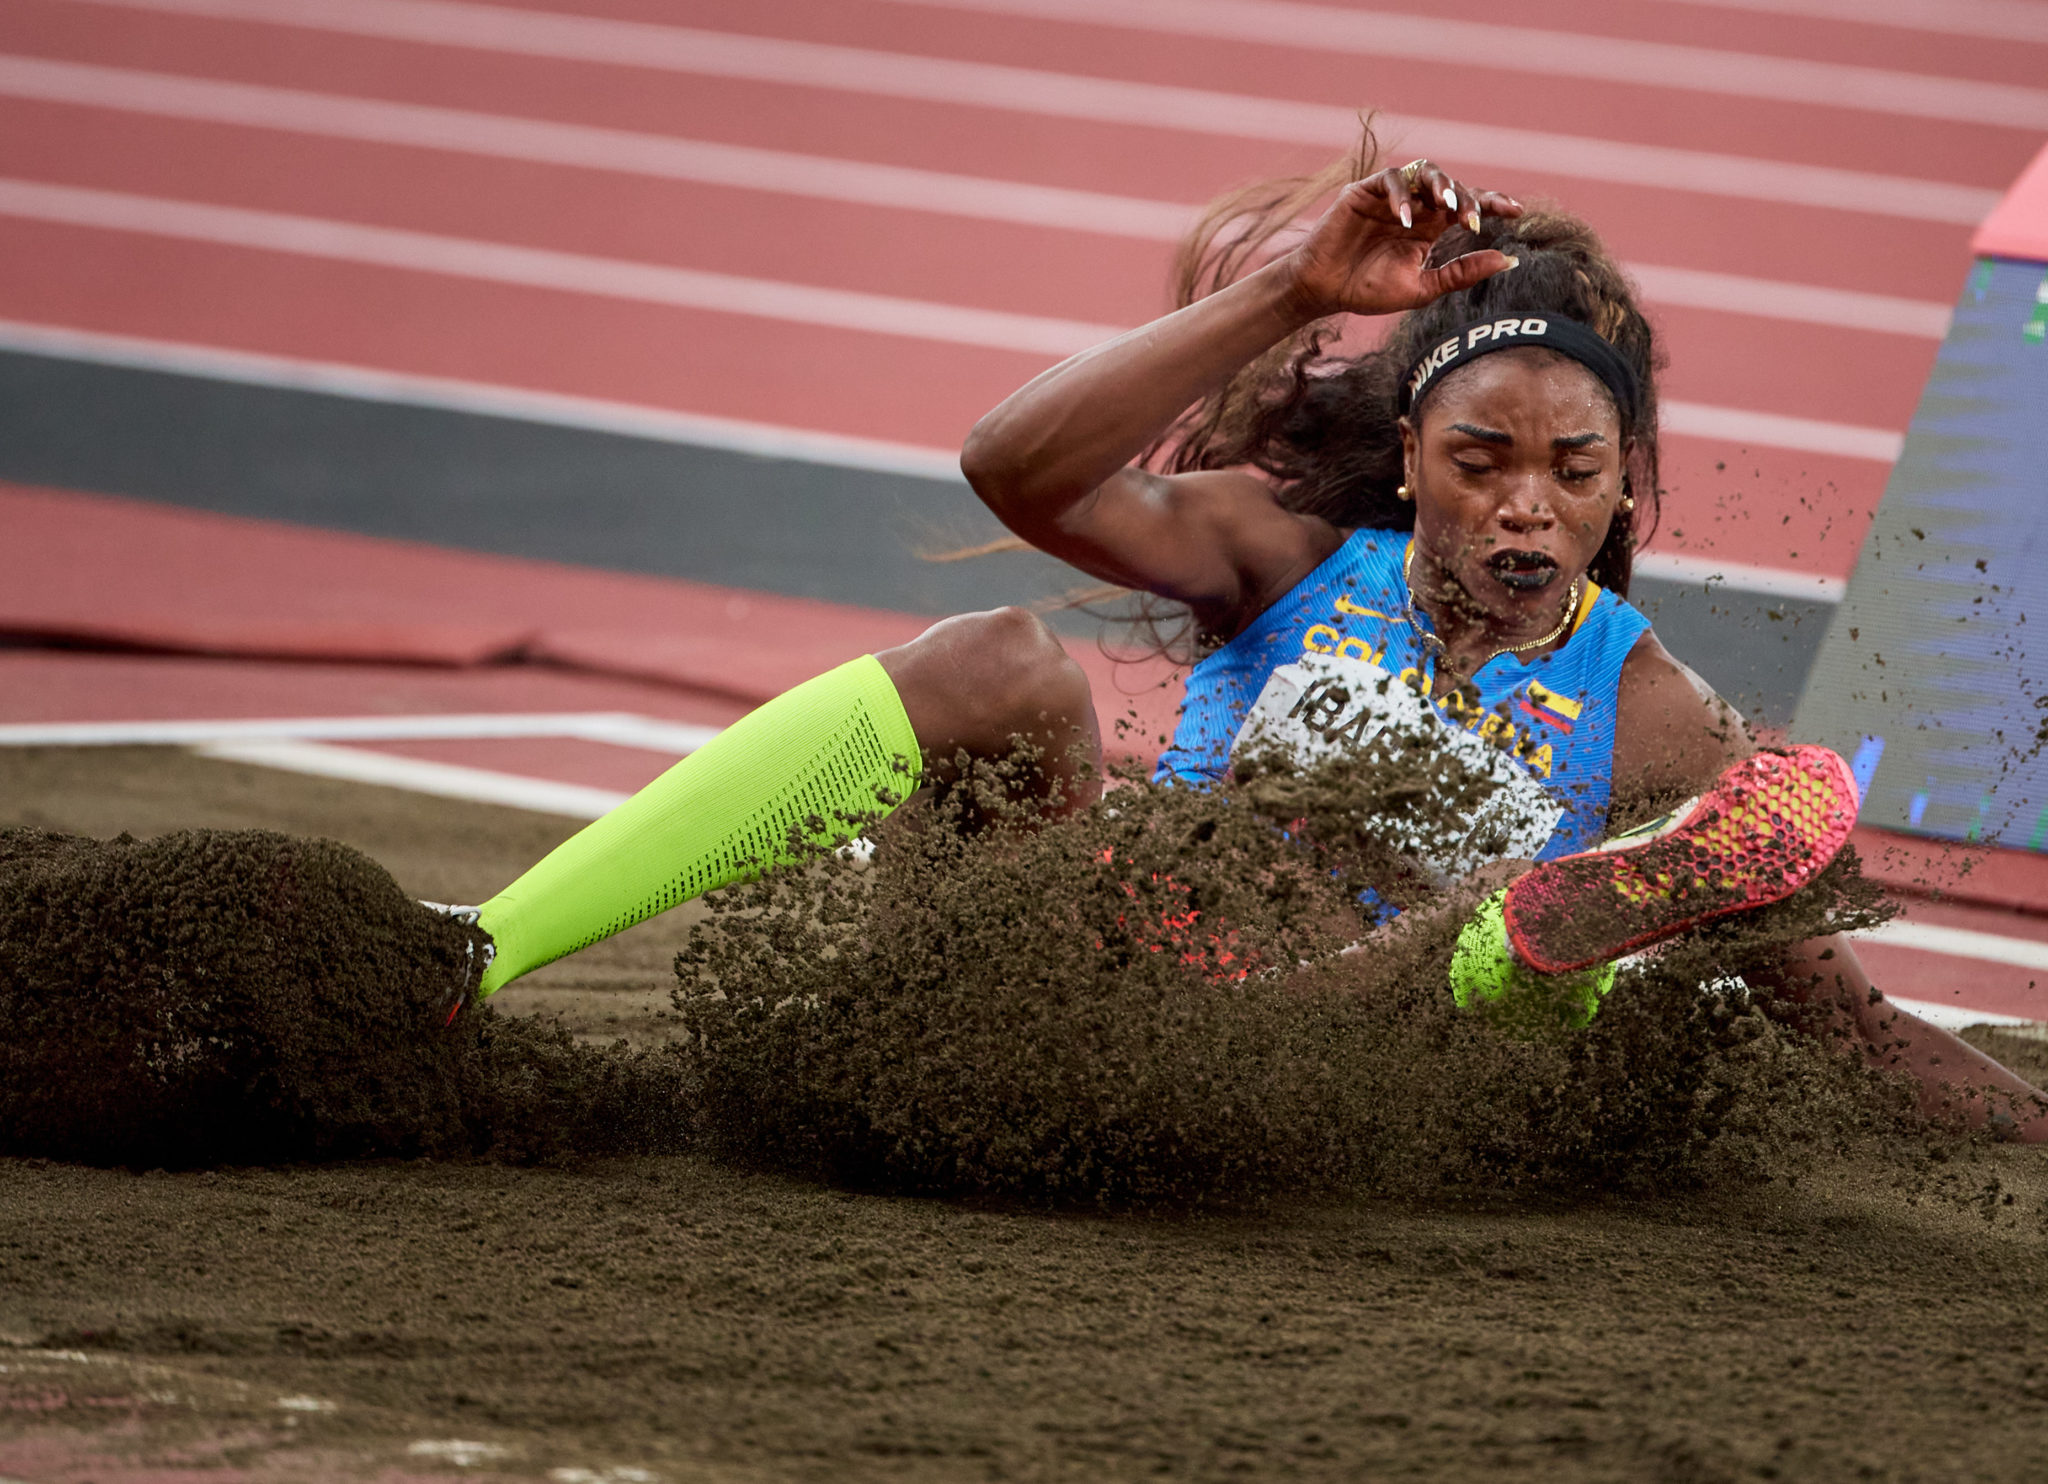 Photograph of Columbia's Caterine Ibarguen in the women's triple jump final during the Tokyo 2020 Olympics at the Olympic Stadium in Tokyo, Japan.